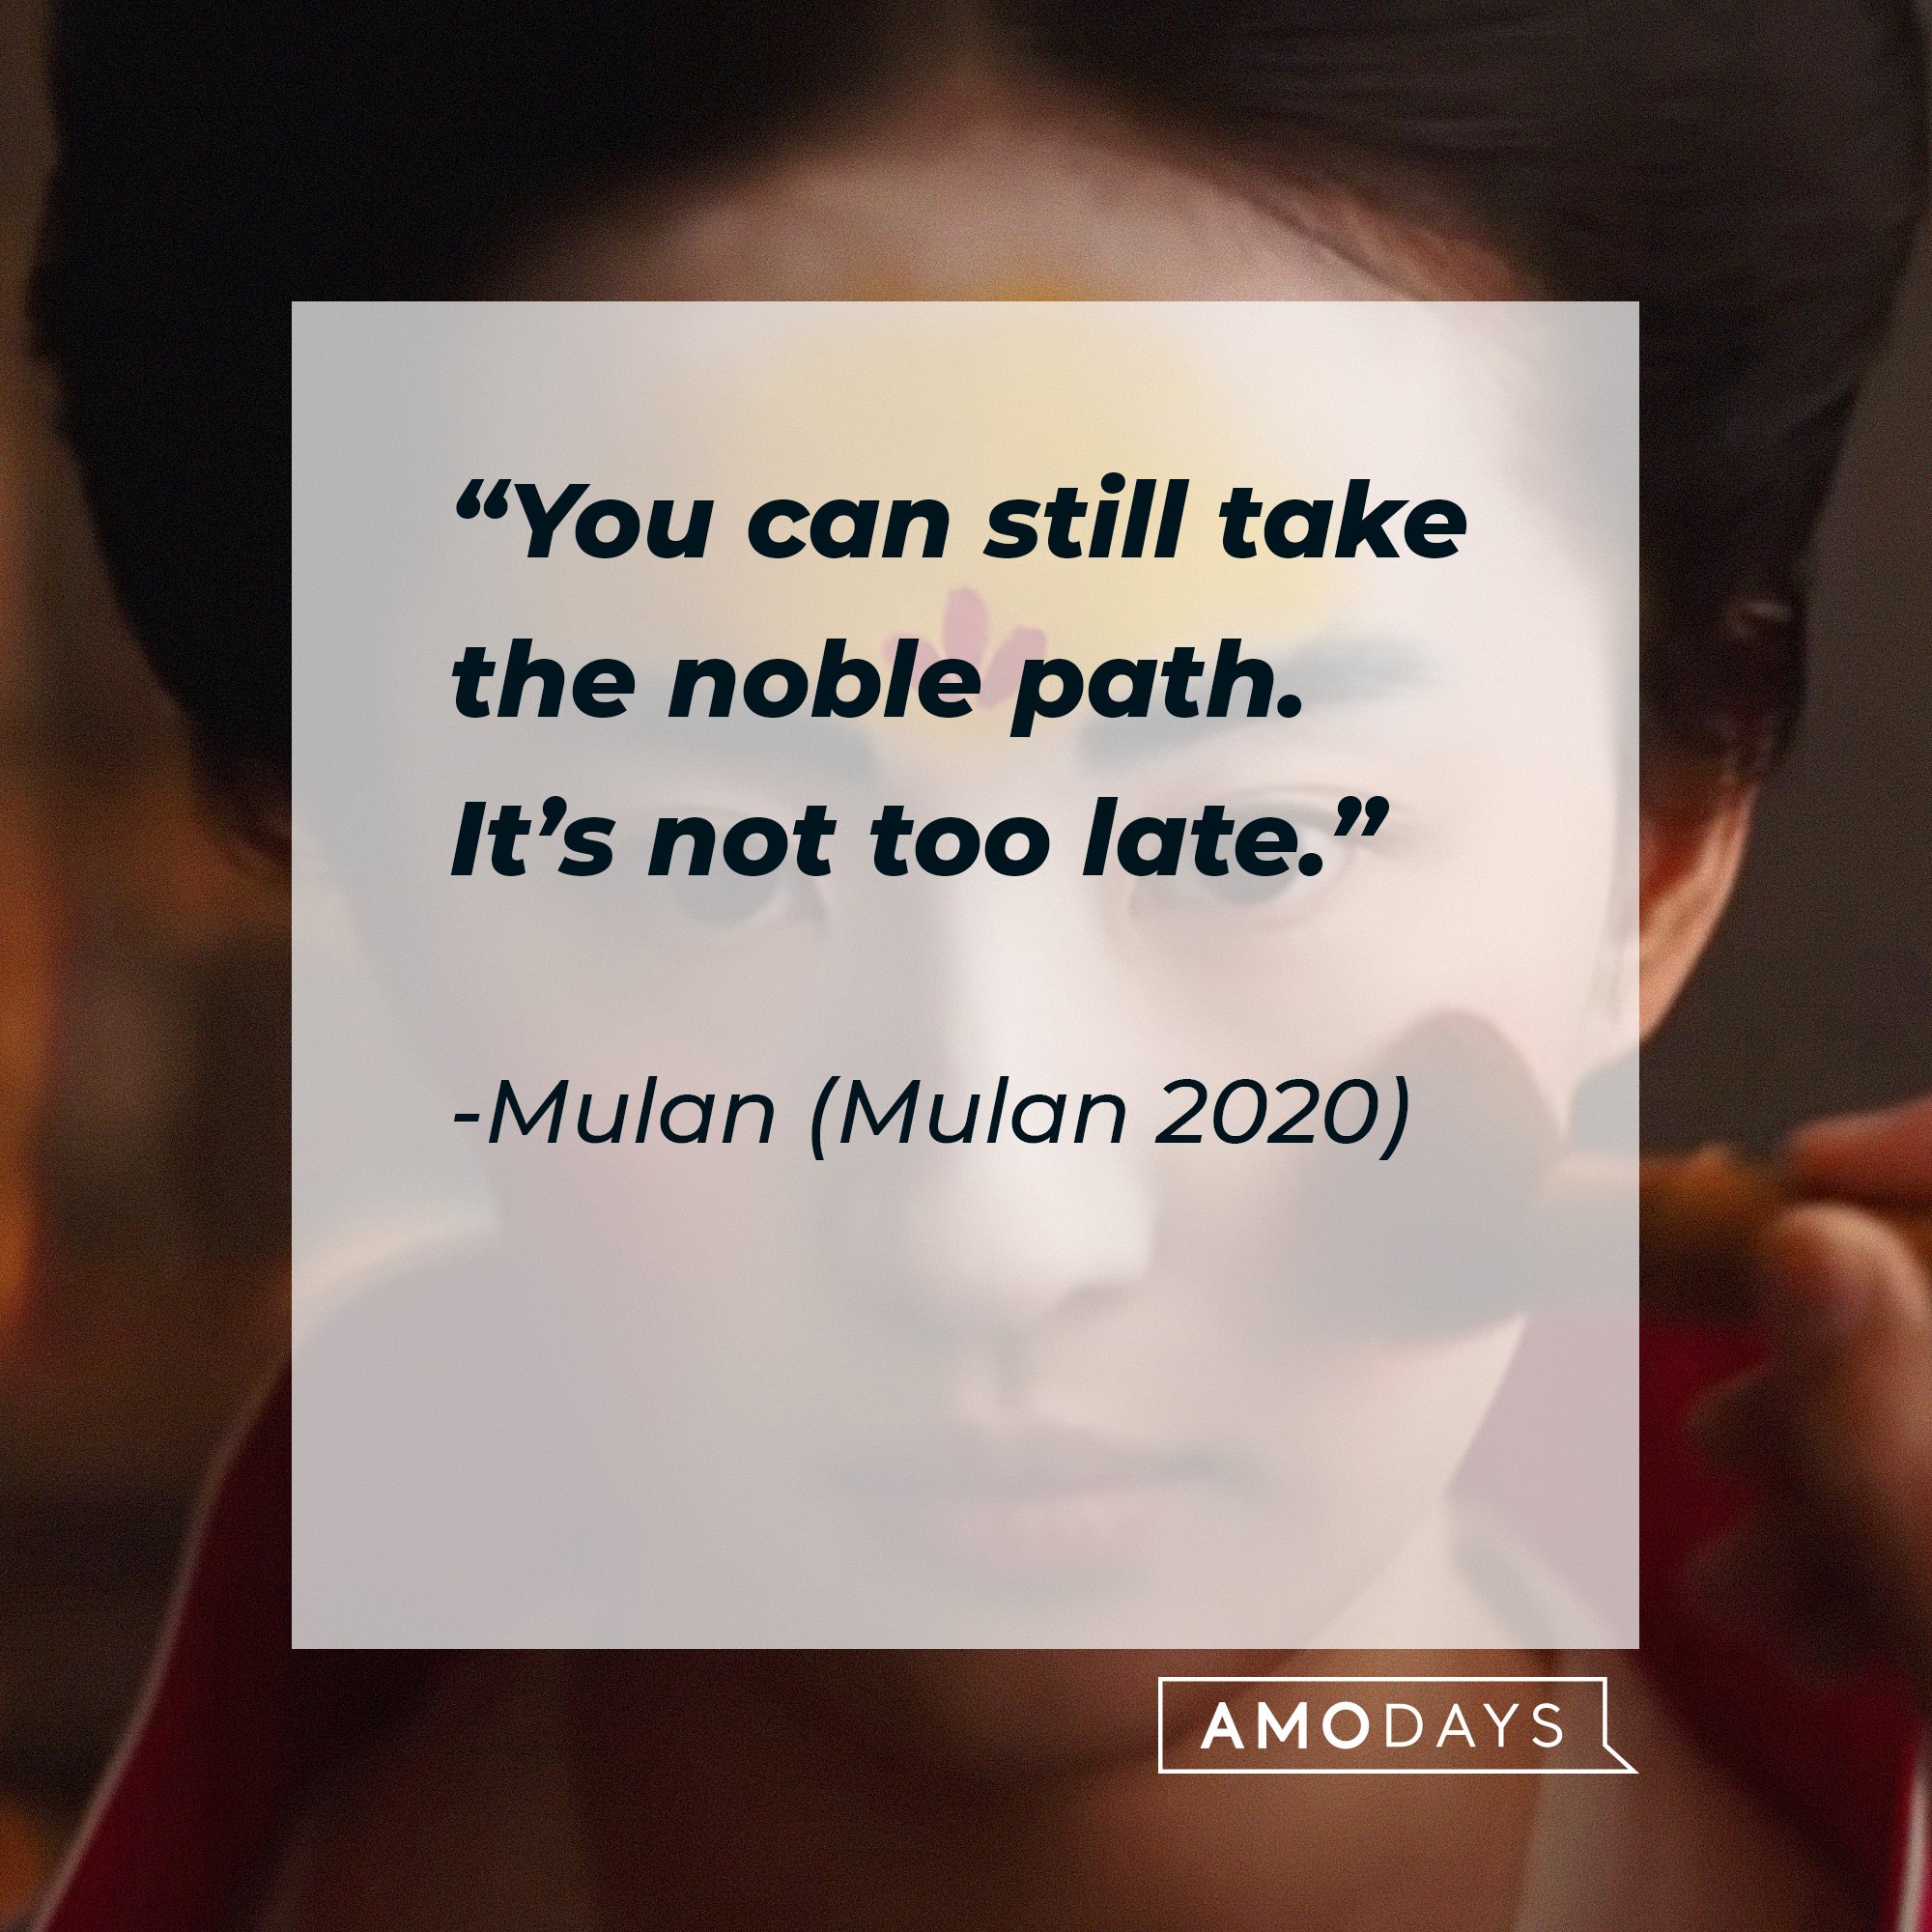 Mulan’s quote: “You can still take the noble path. It’s not too late.” | Image: AmoDays